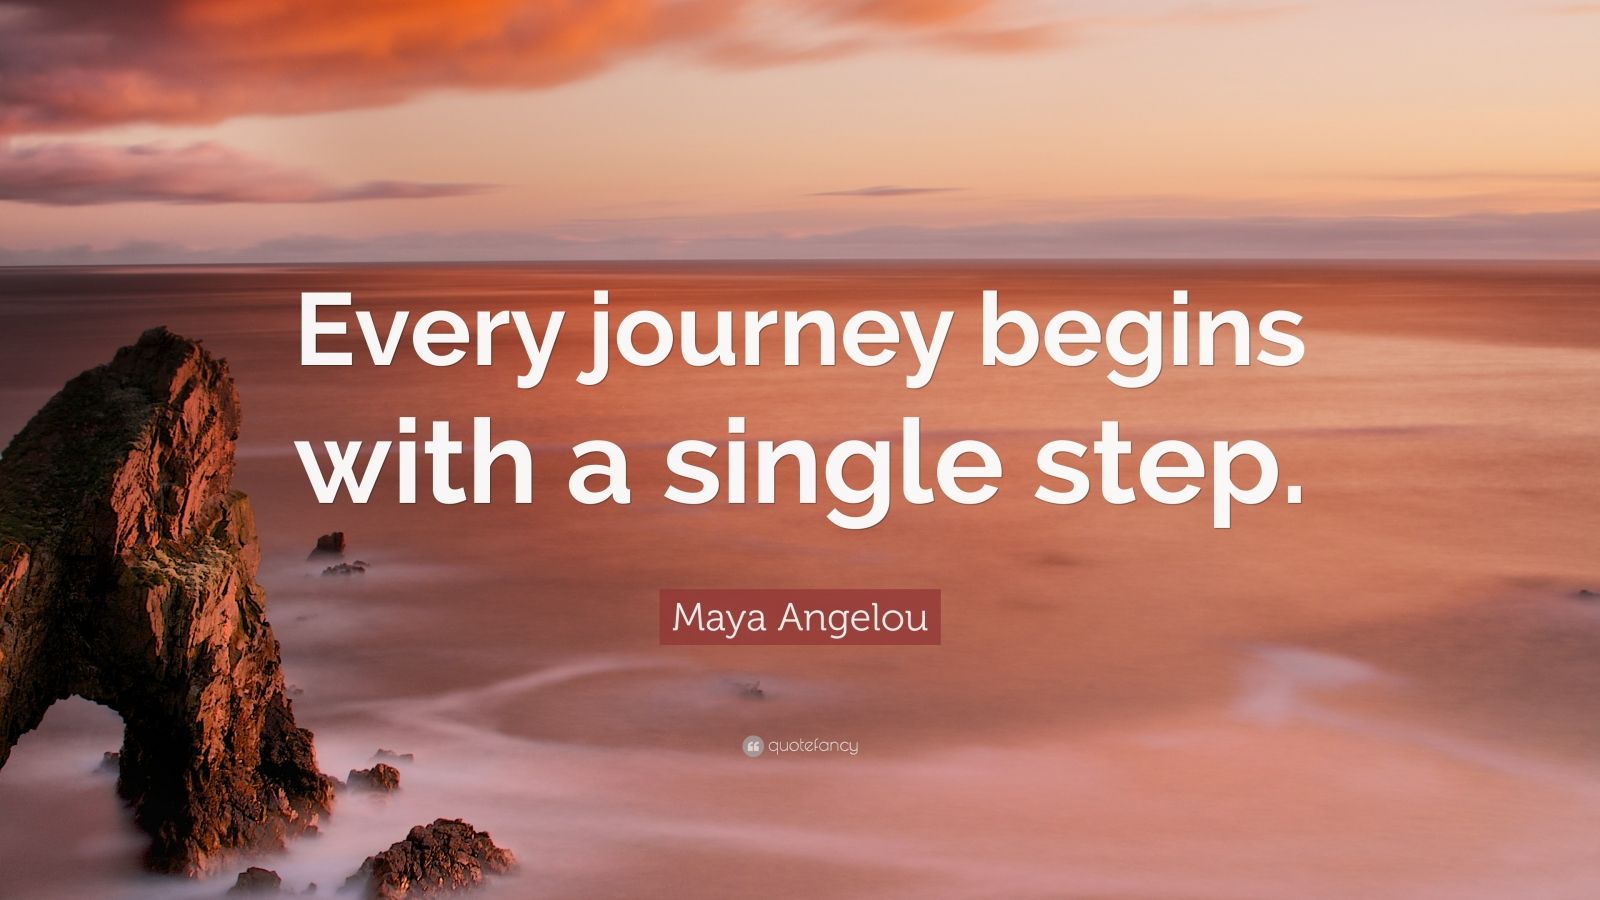 the journey starts with a single step